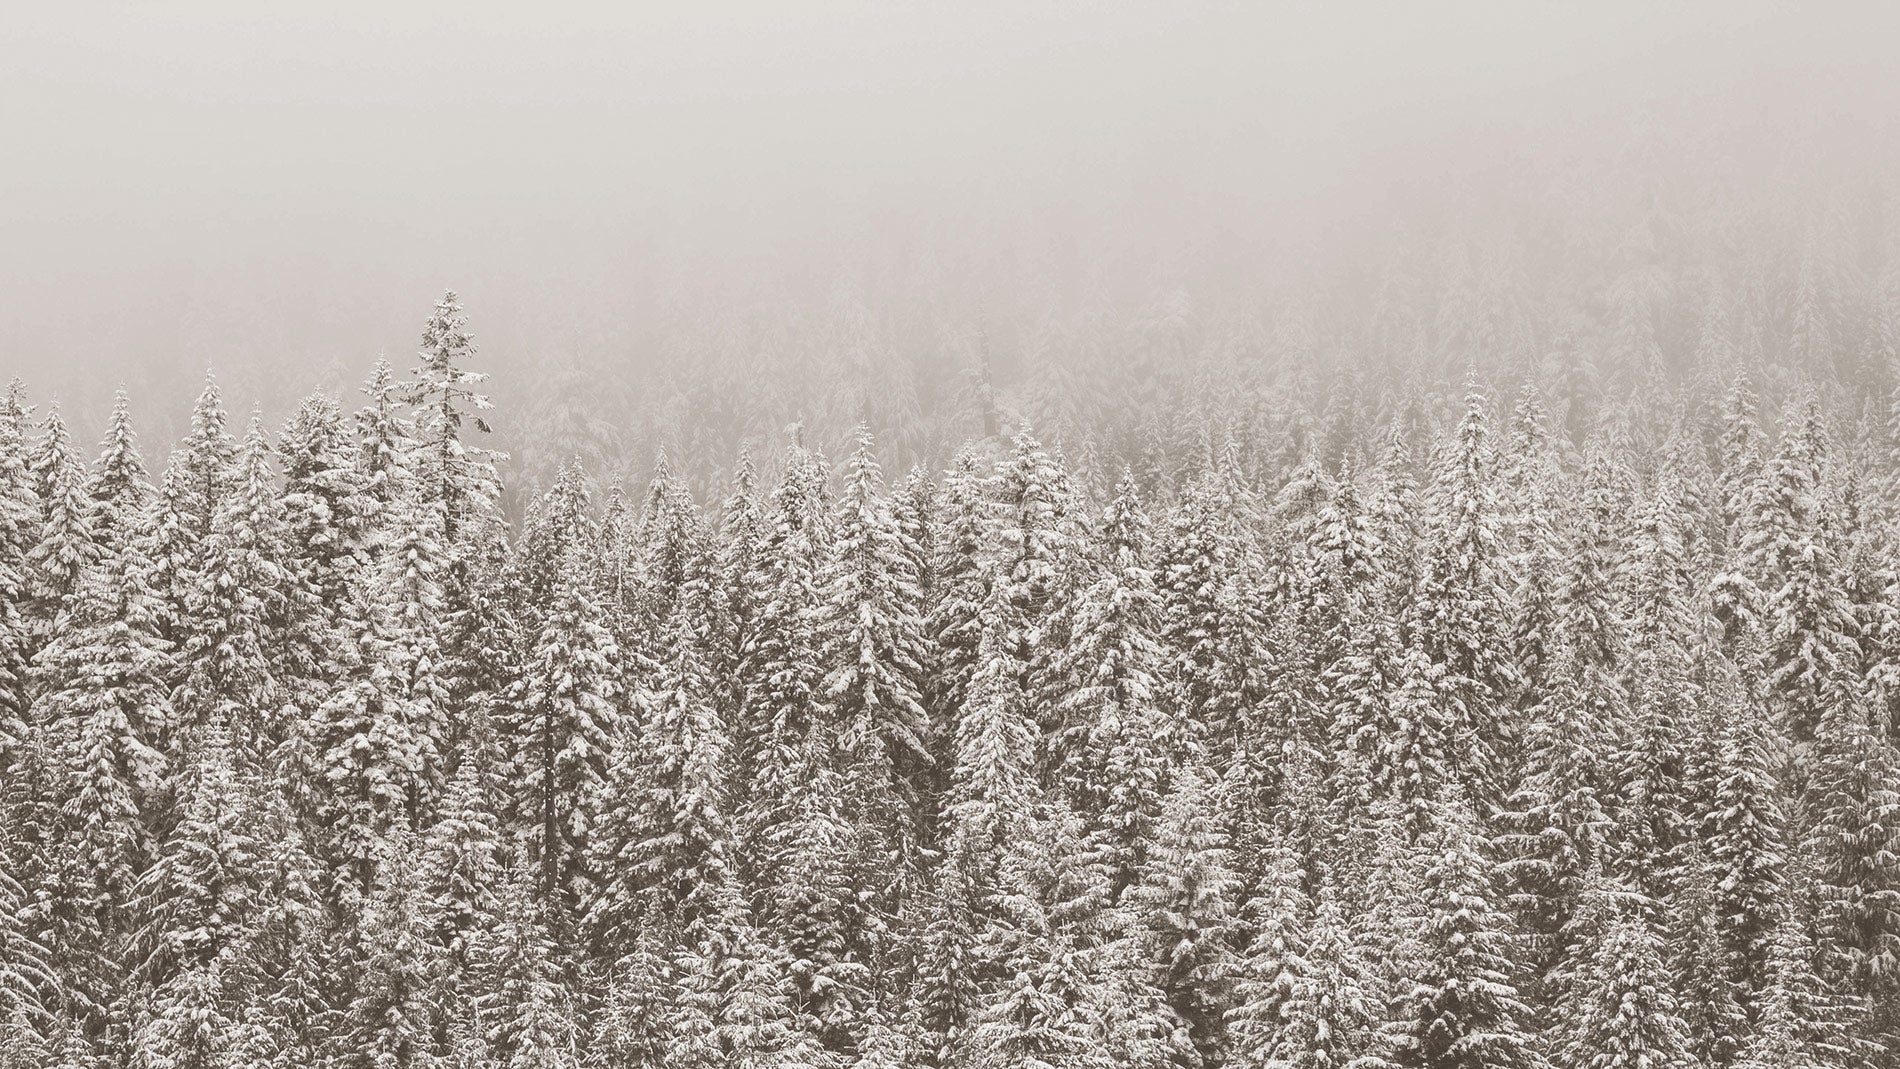 A forest of trees blanketed by snow with a cold, foggy air coming through the top of the trees.